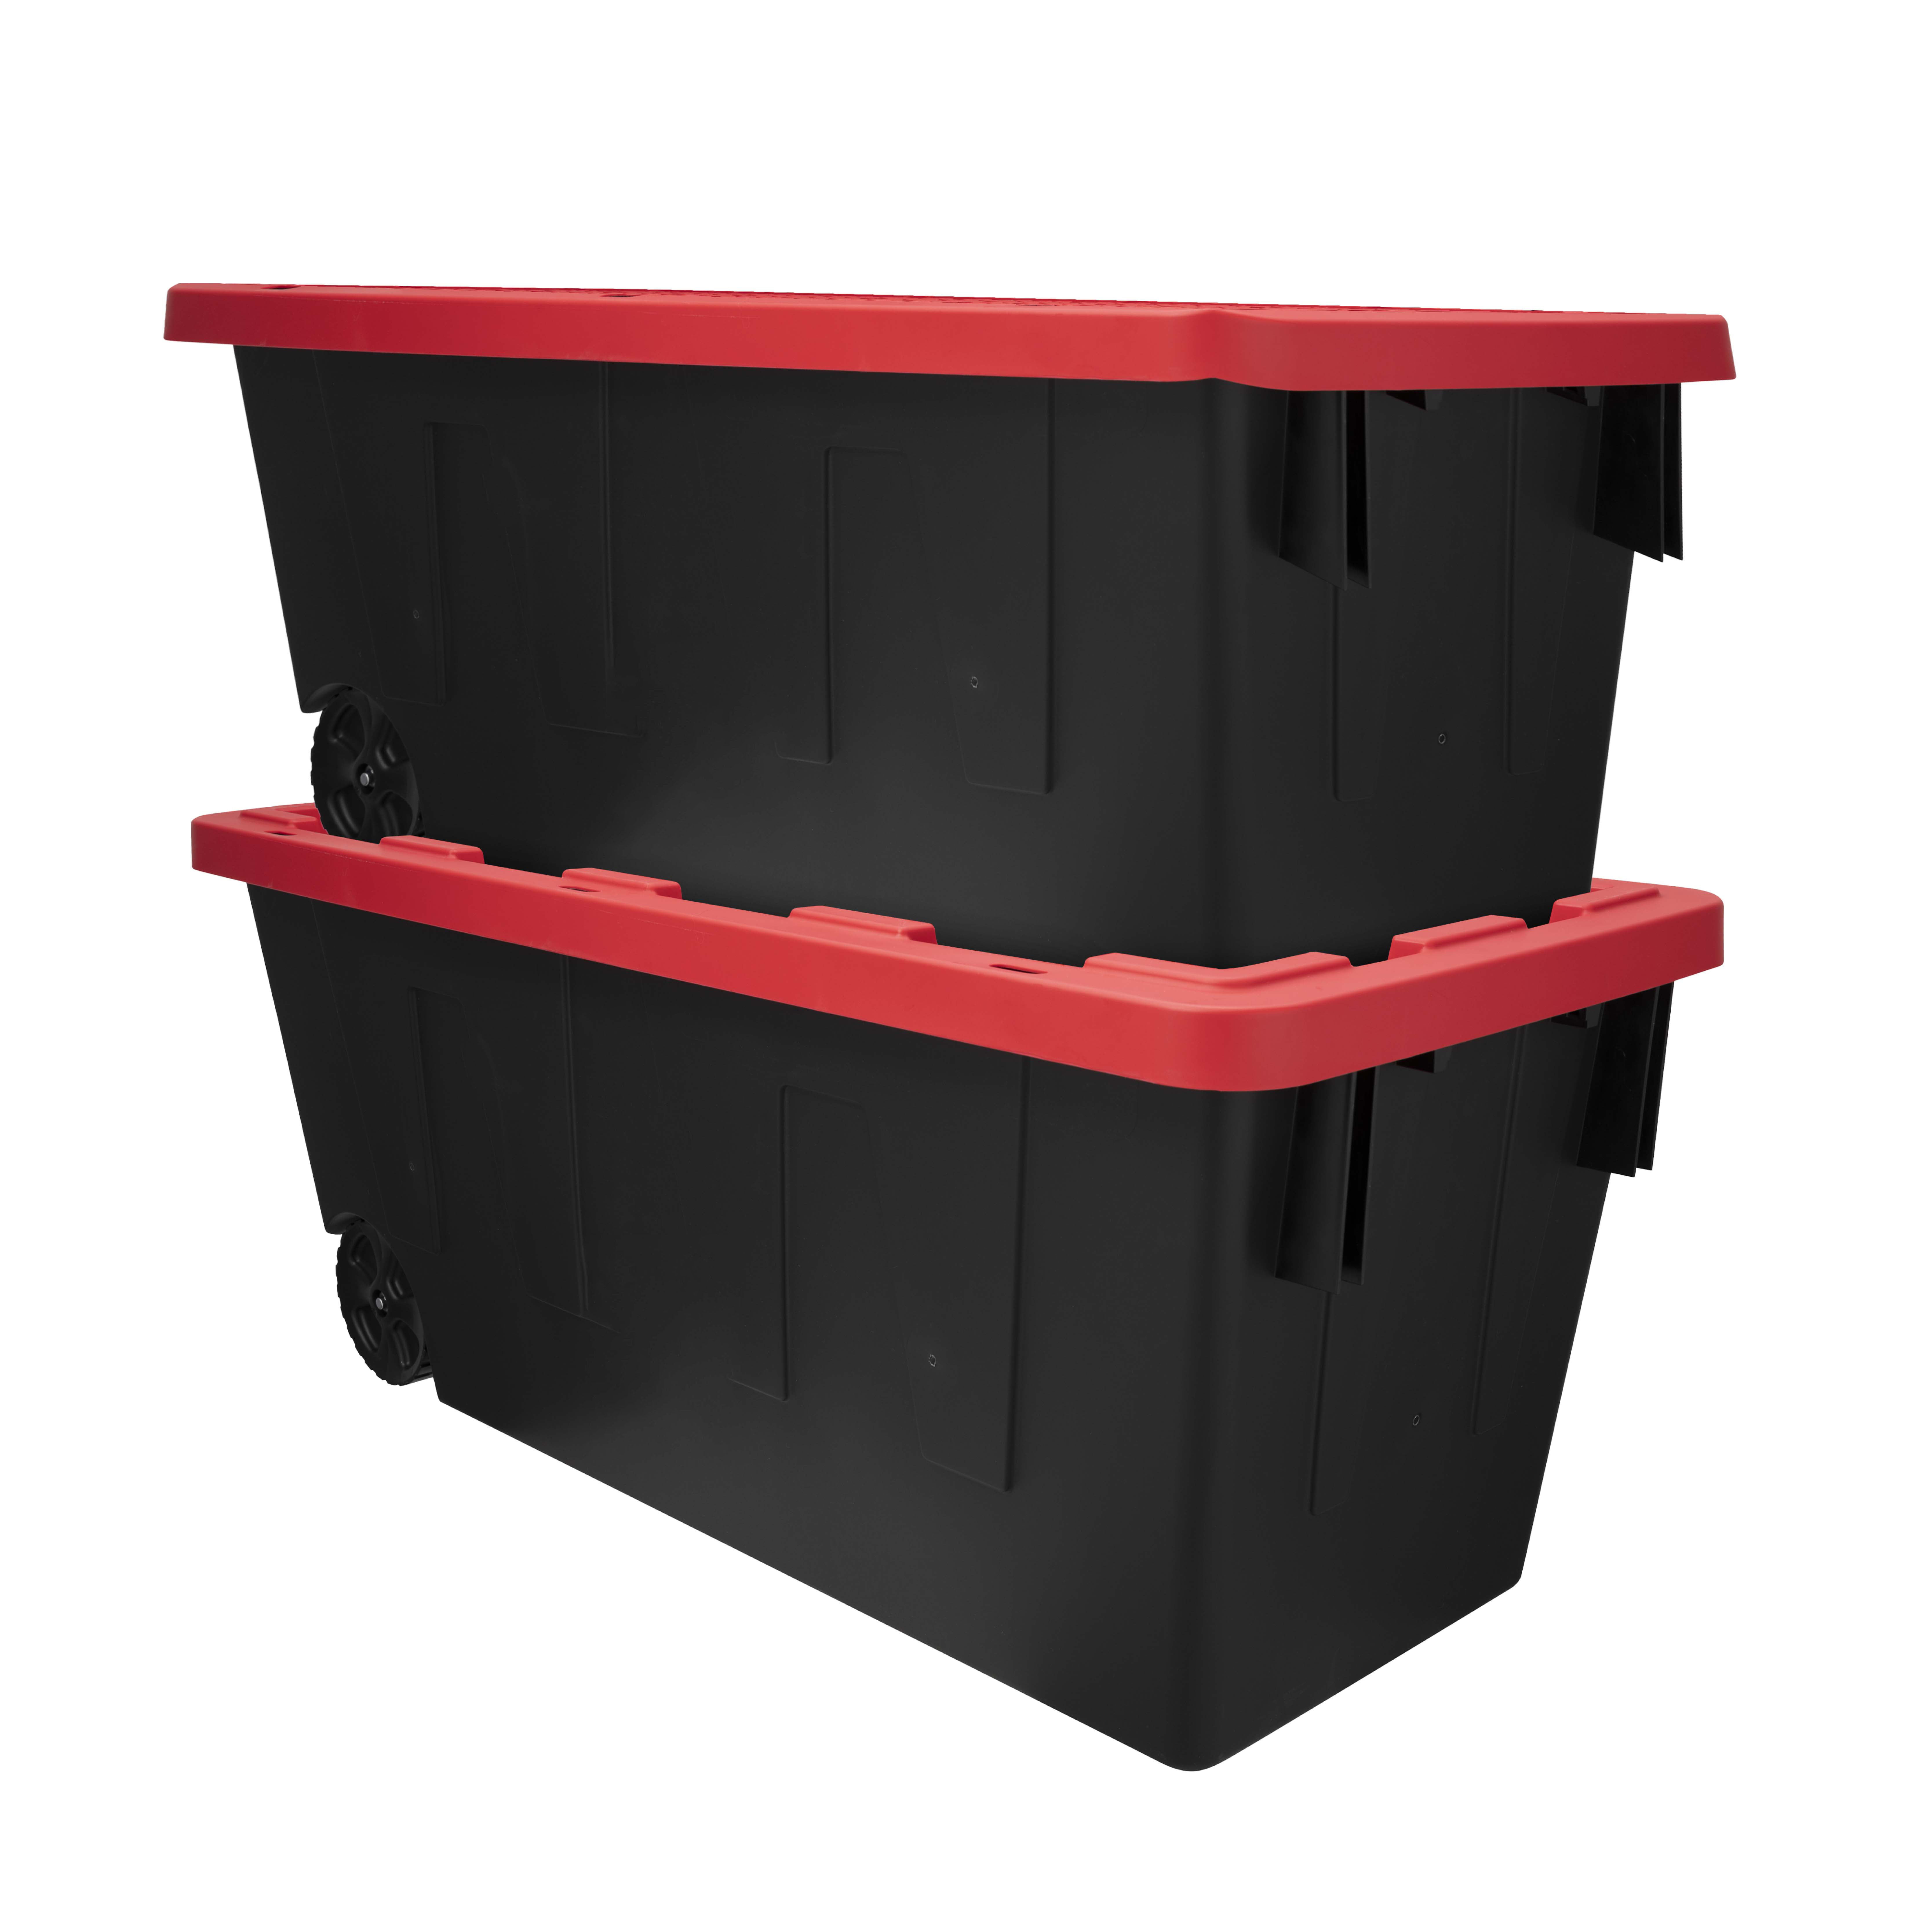 Sterilite 14699002 40 Gallon/151 Liter Wheeled Industrial Tote, Black Lid &  Base w/ Racer Red Handle & Latches, 2-Pack